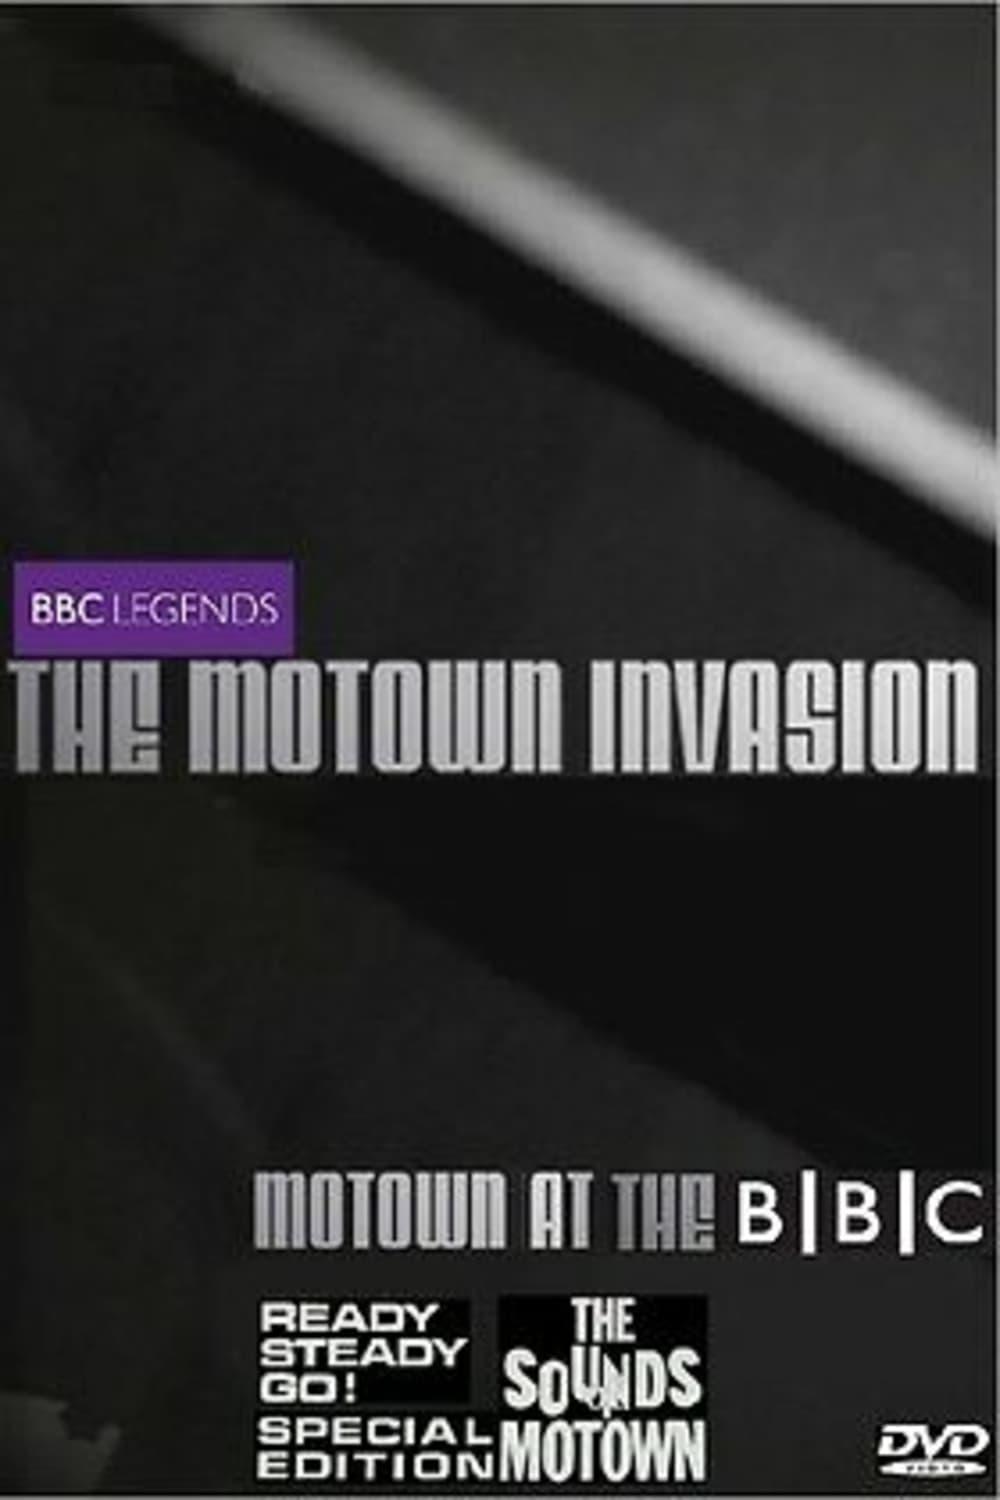 The Motown Invasion poster